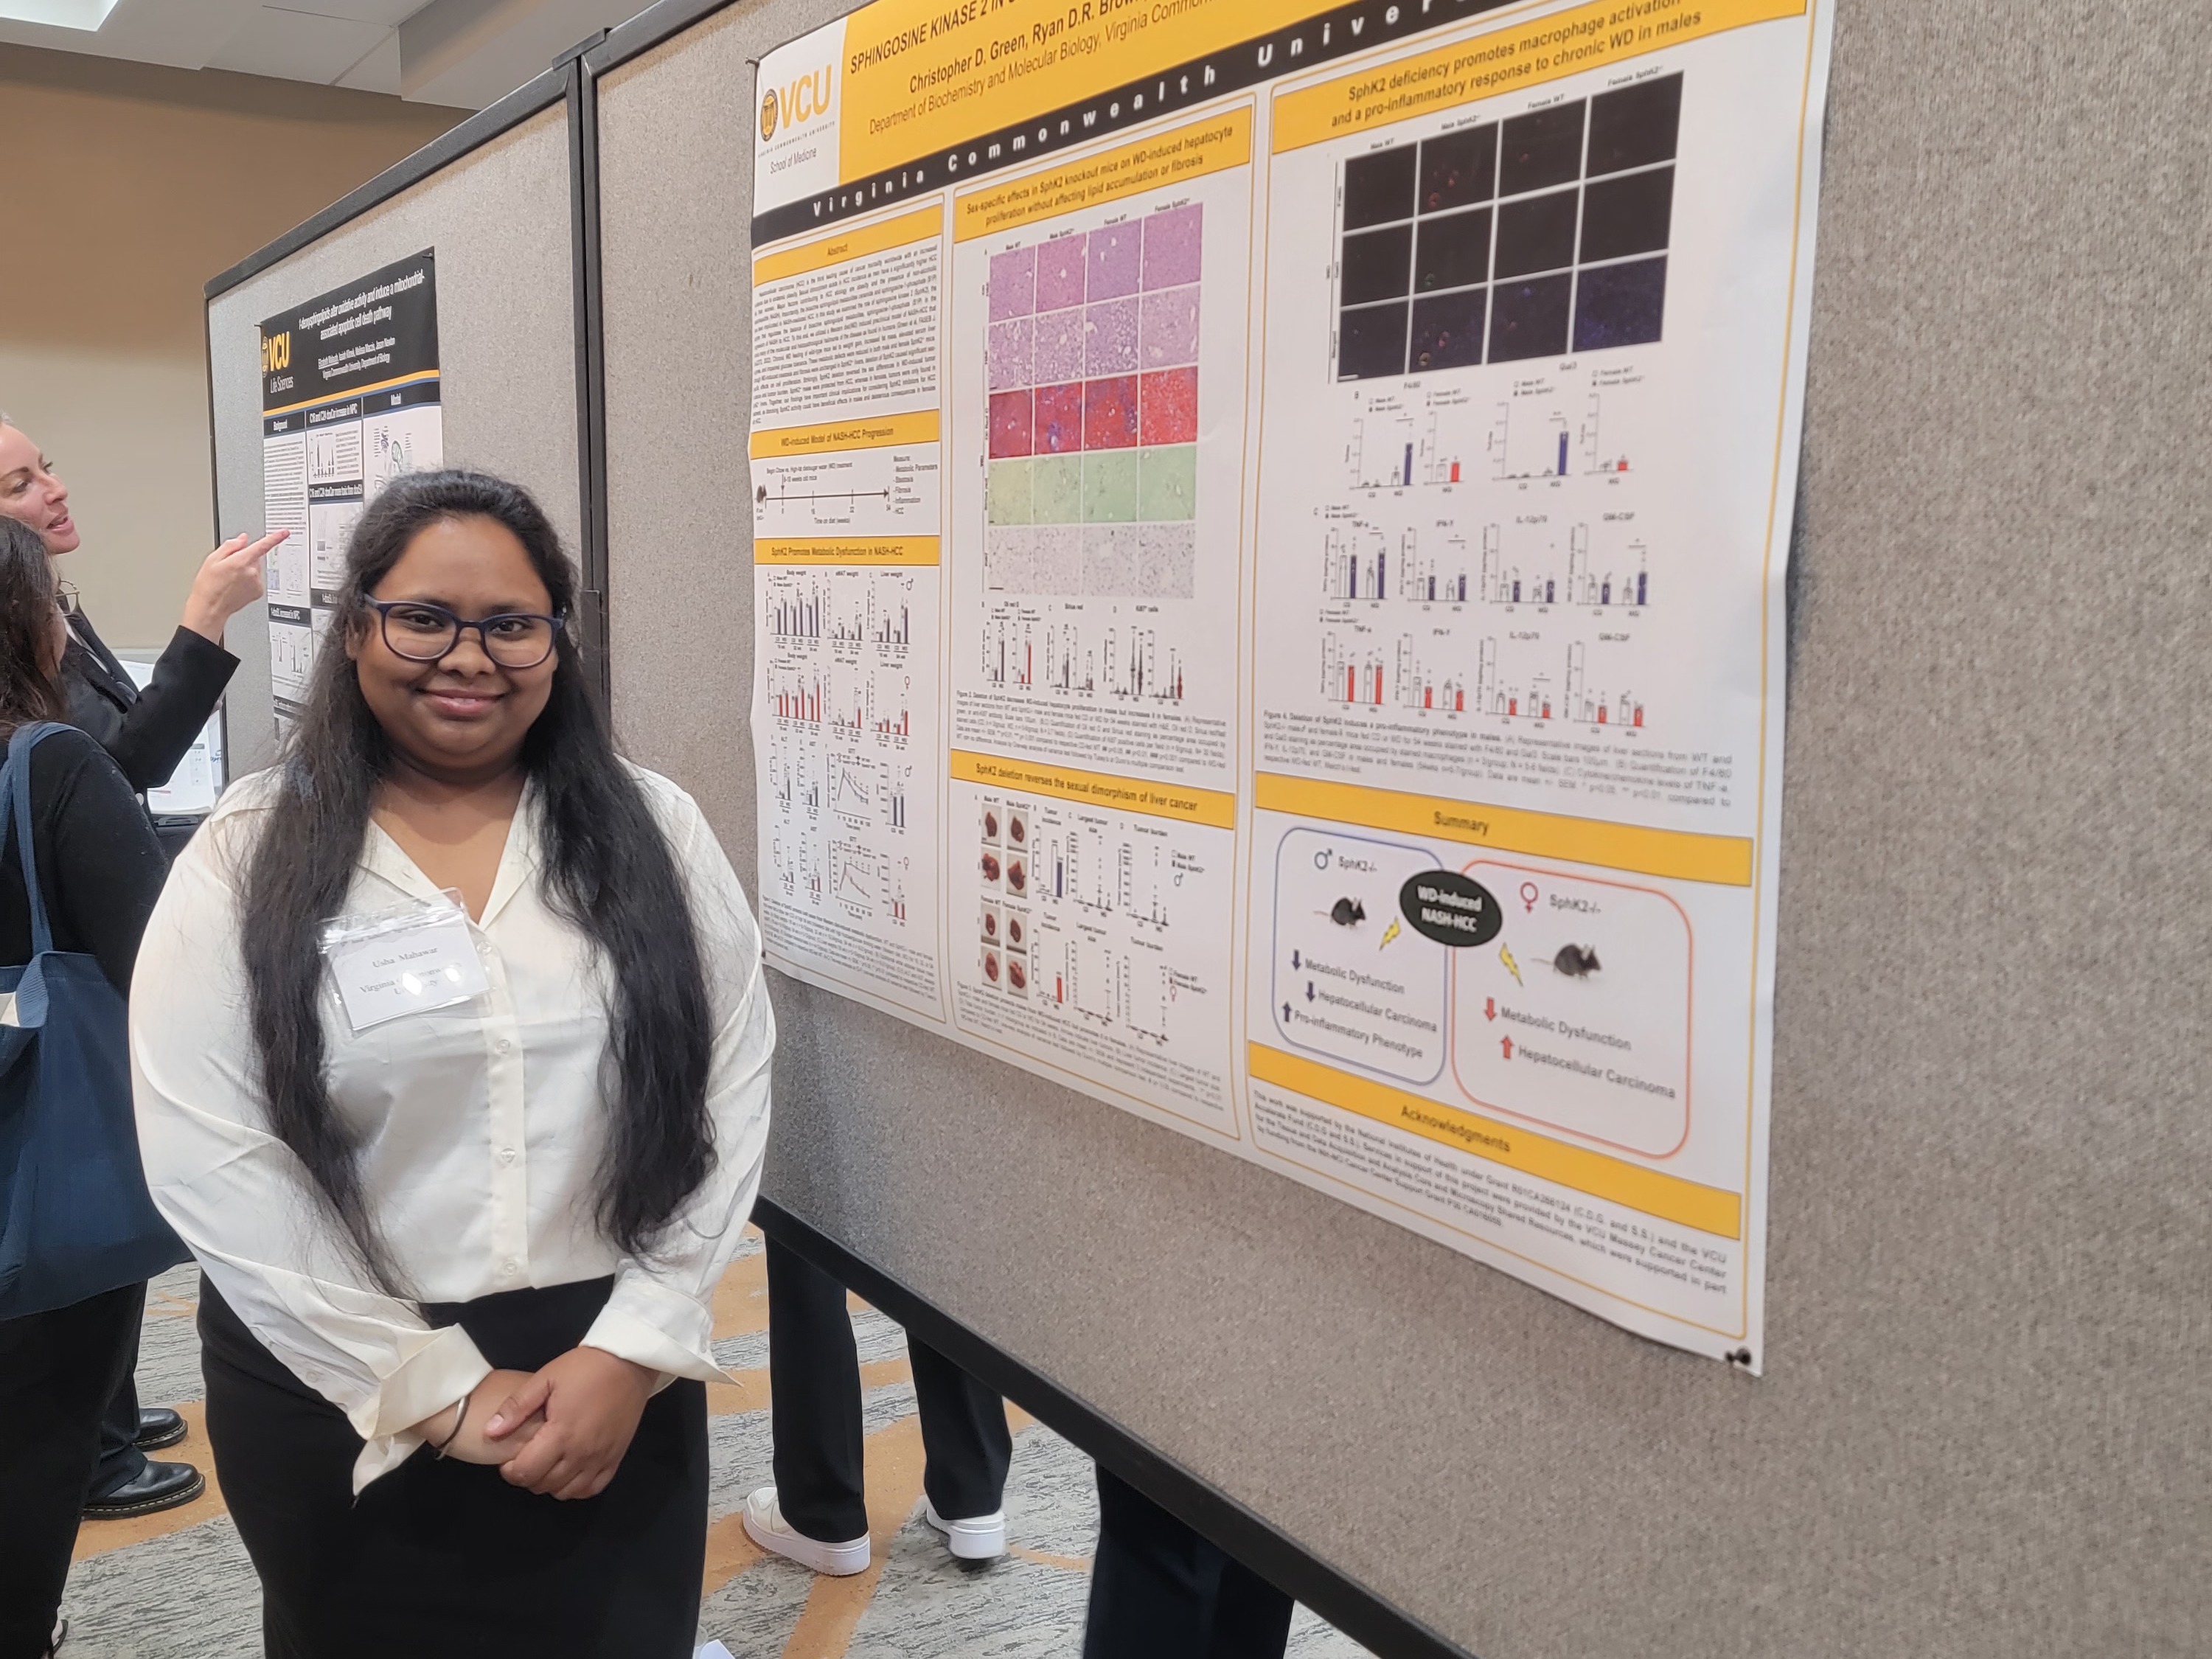 A student presenting their research poster at a conference